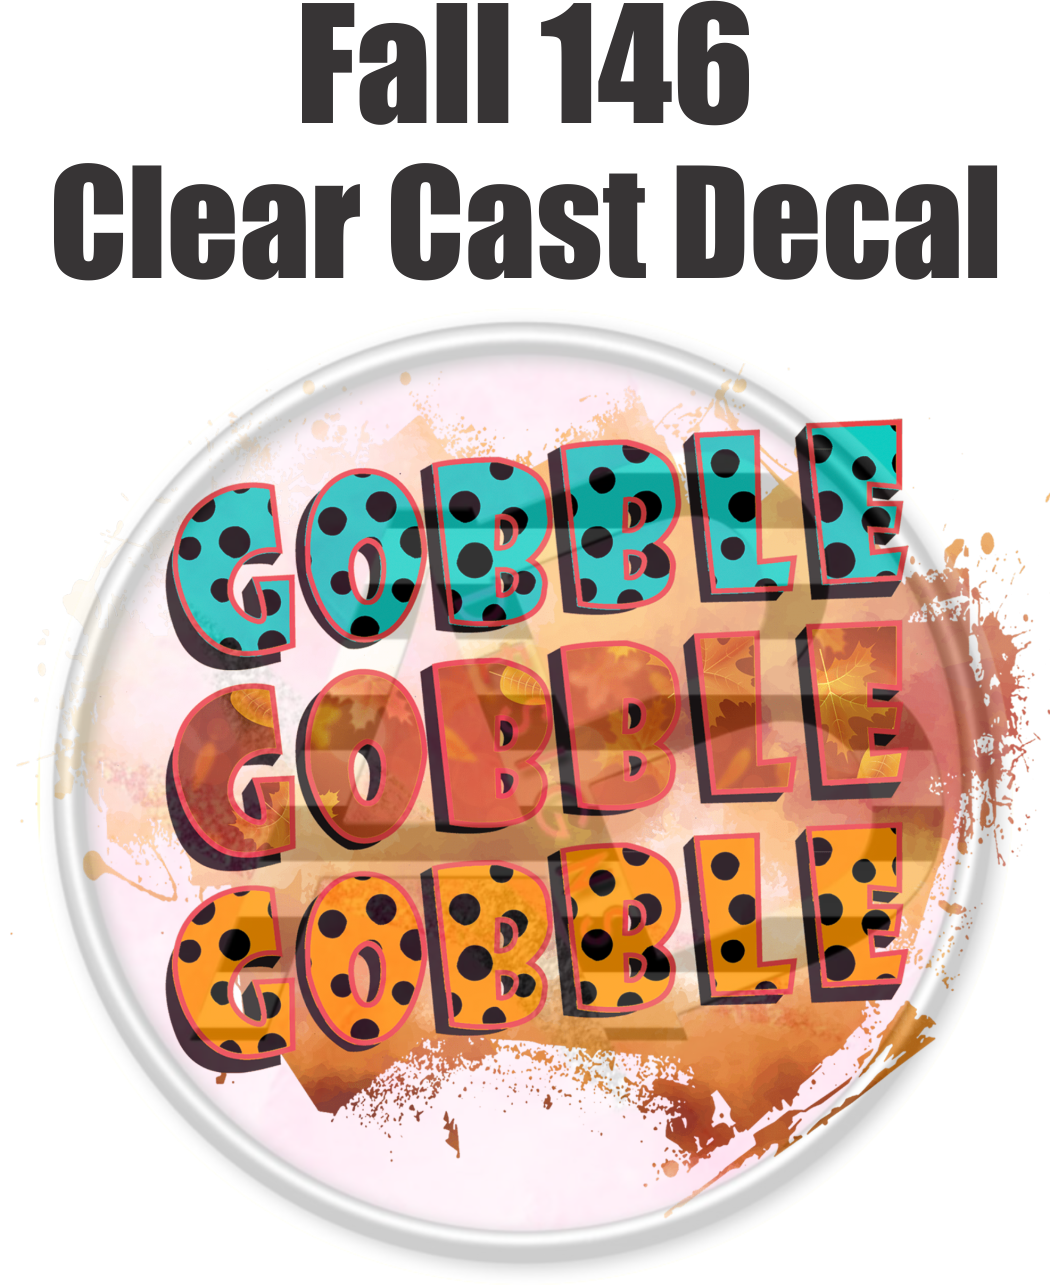 Fall 146 - Clear Cast Decal